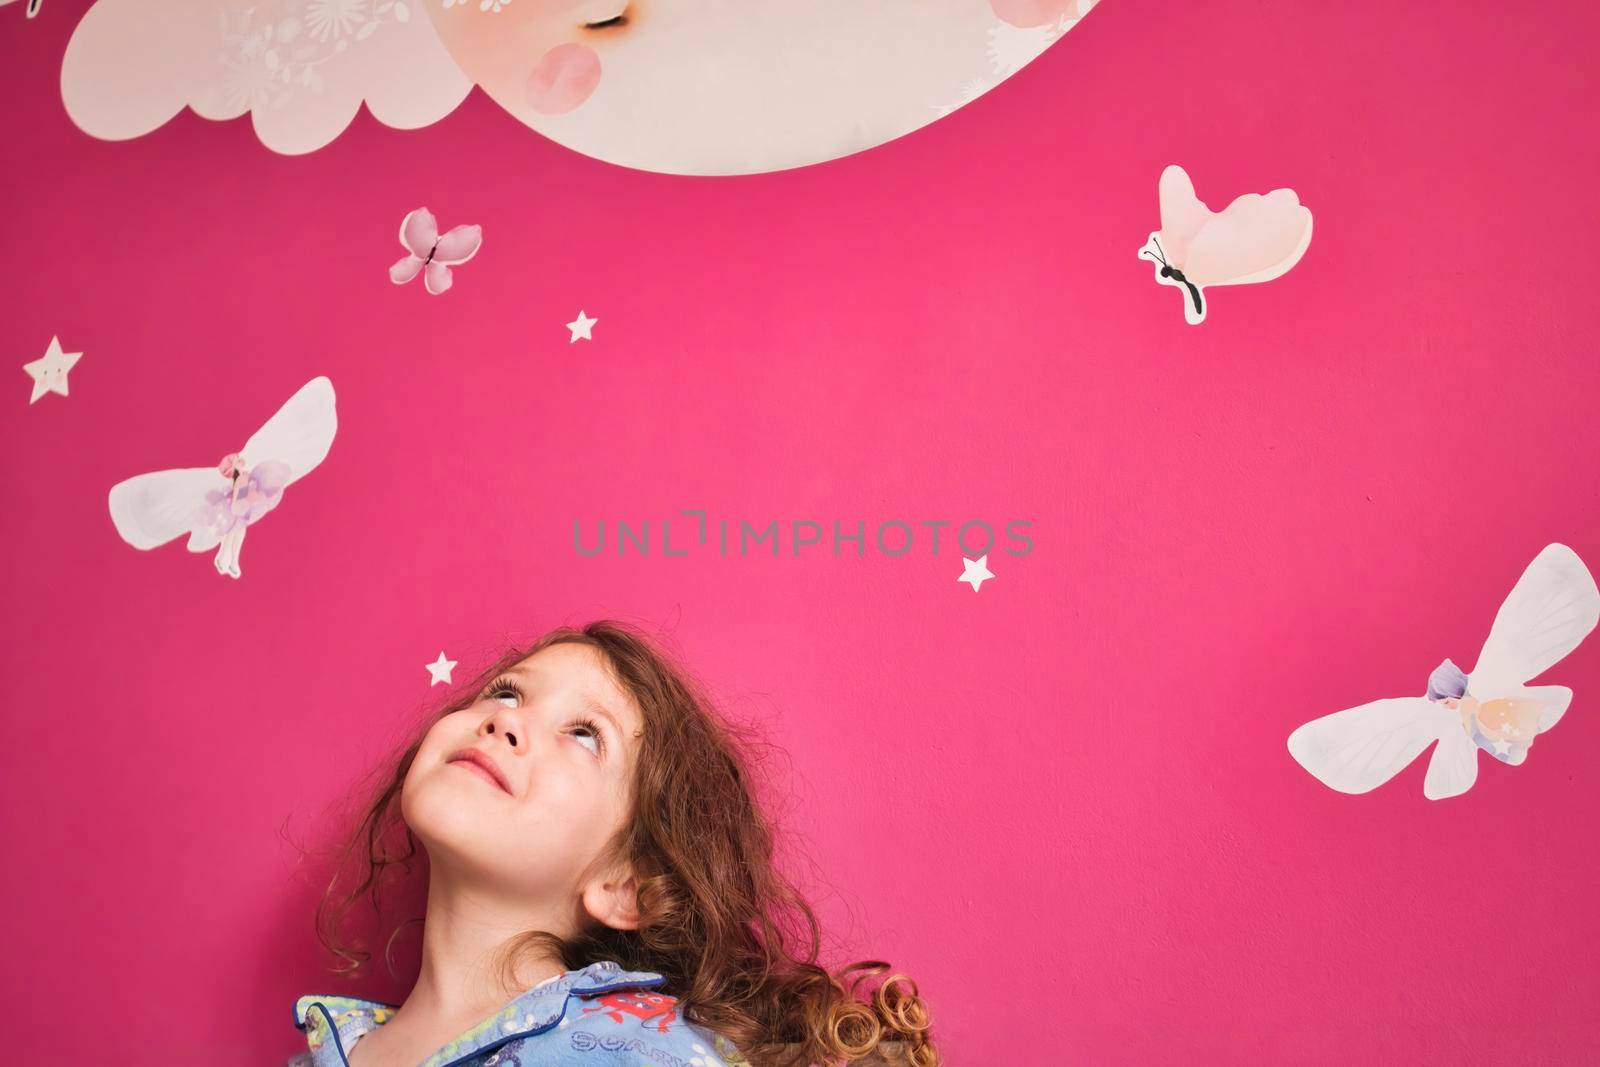 Young cute girl wearing pajamas looking up at a pink wall with decal stars, moon and fairies